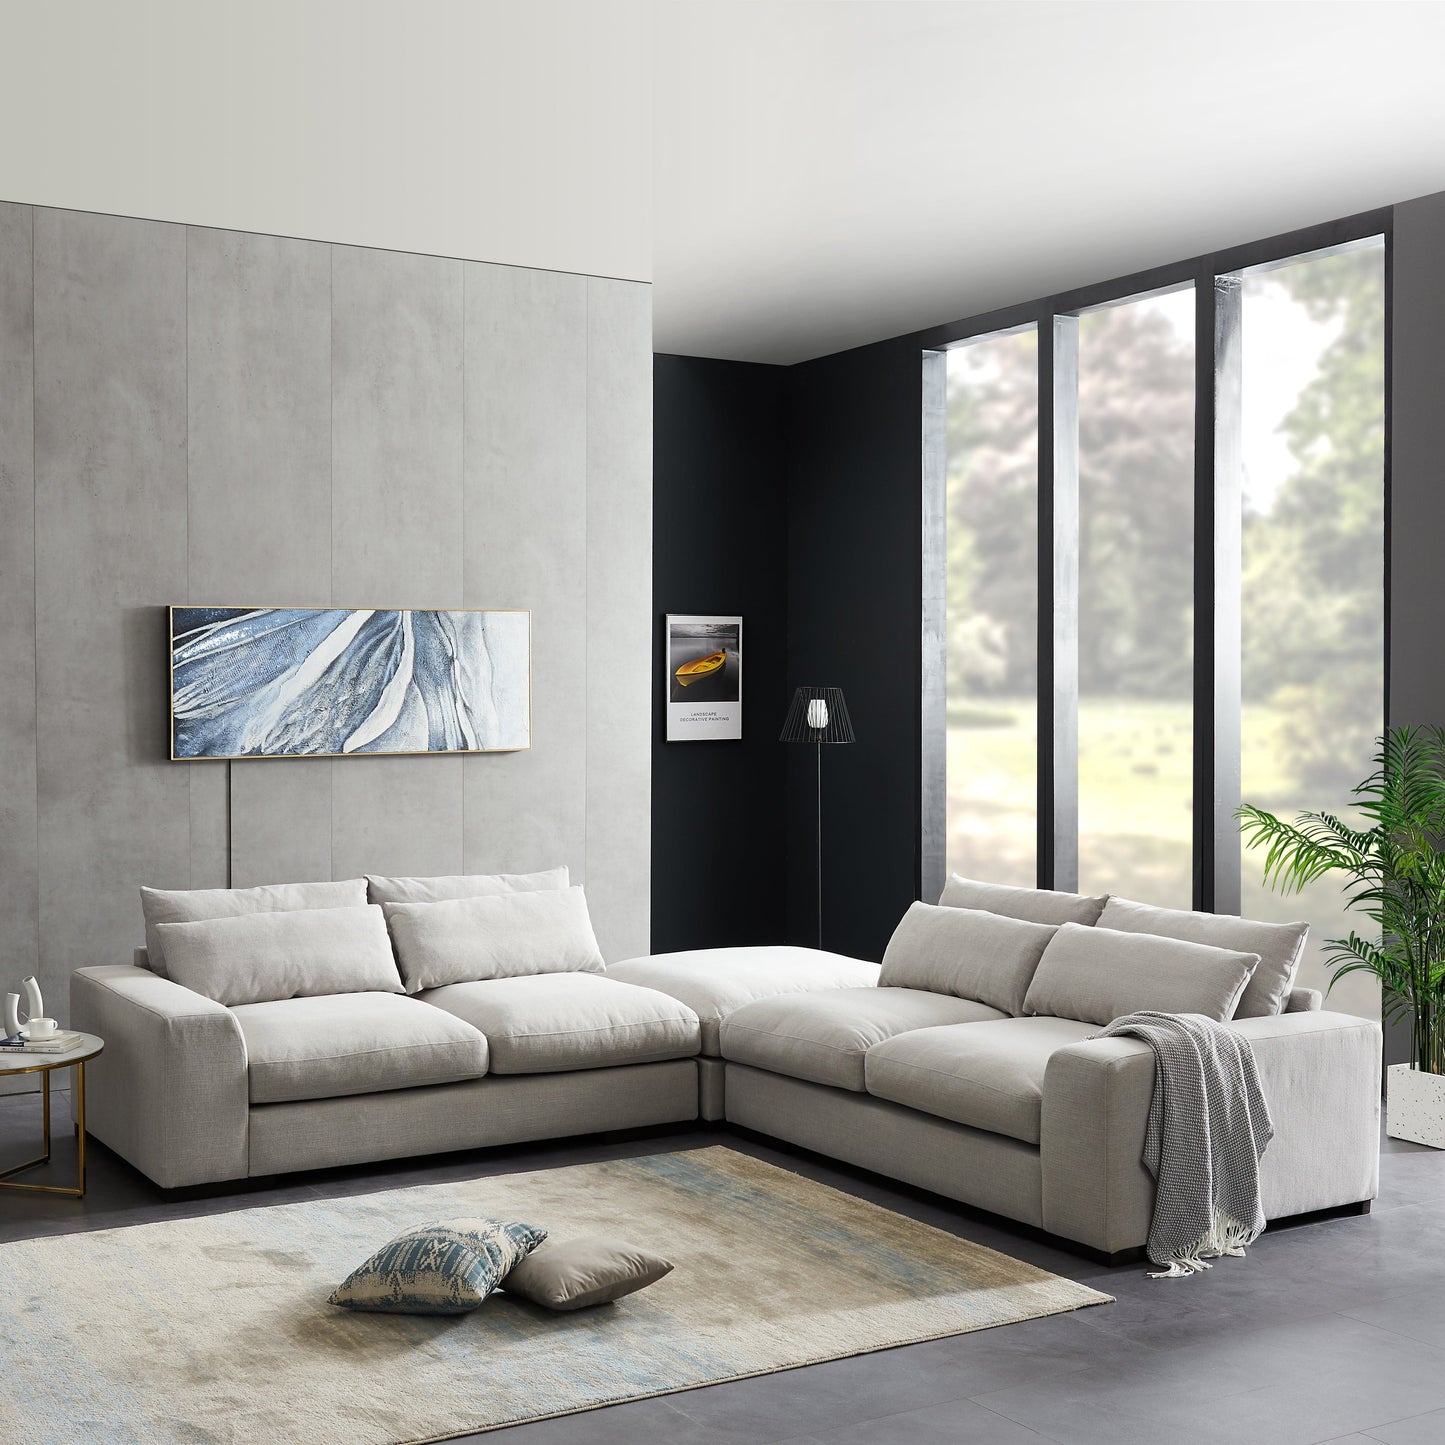 TFC&H Co. SOFA AND COMFORTABLE SECTIONAL SOFA - LIGHT GREY- Ships from The US - sectional at TFC&H Co.